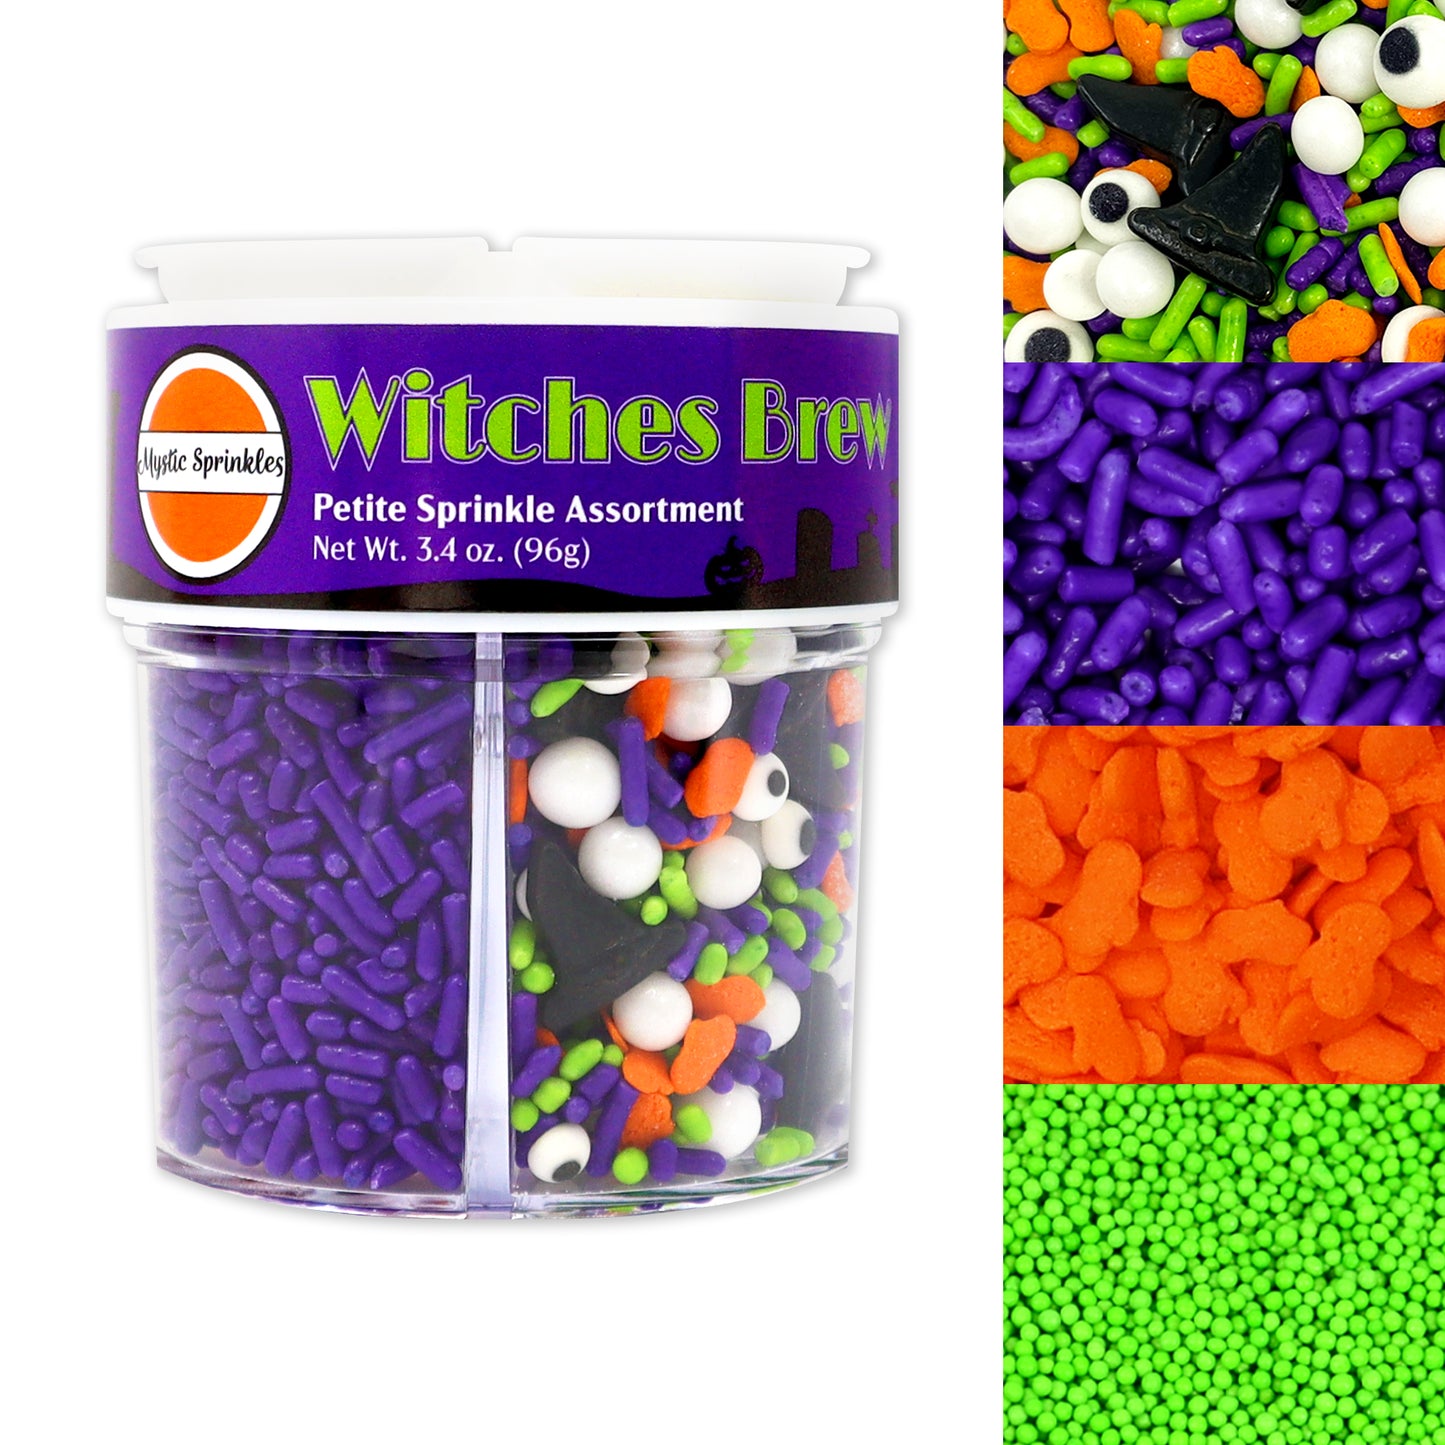 Witches Brew Petite Sprinkle Assortment 3.4oz